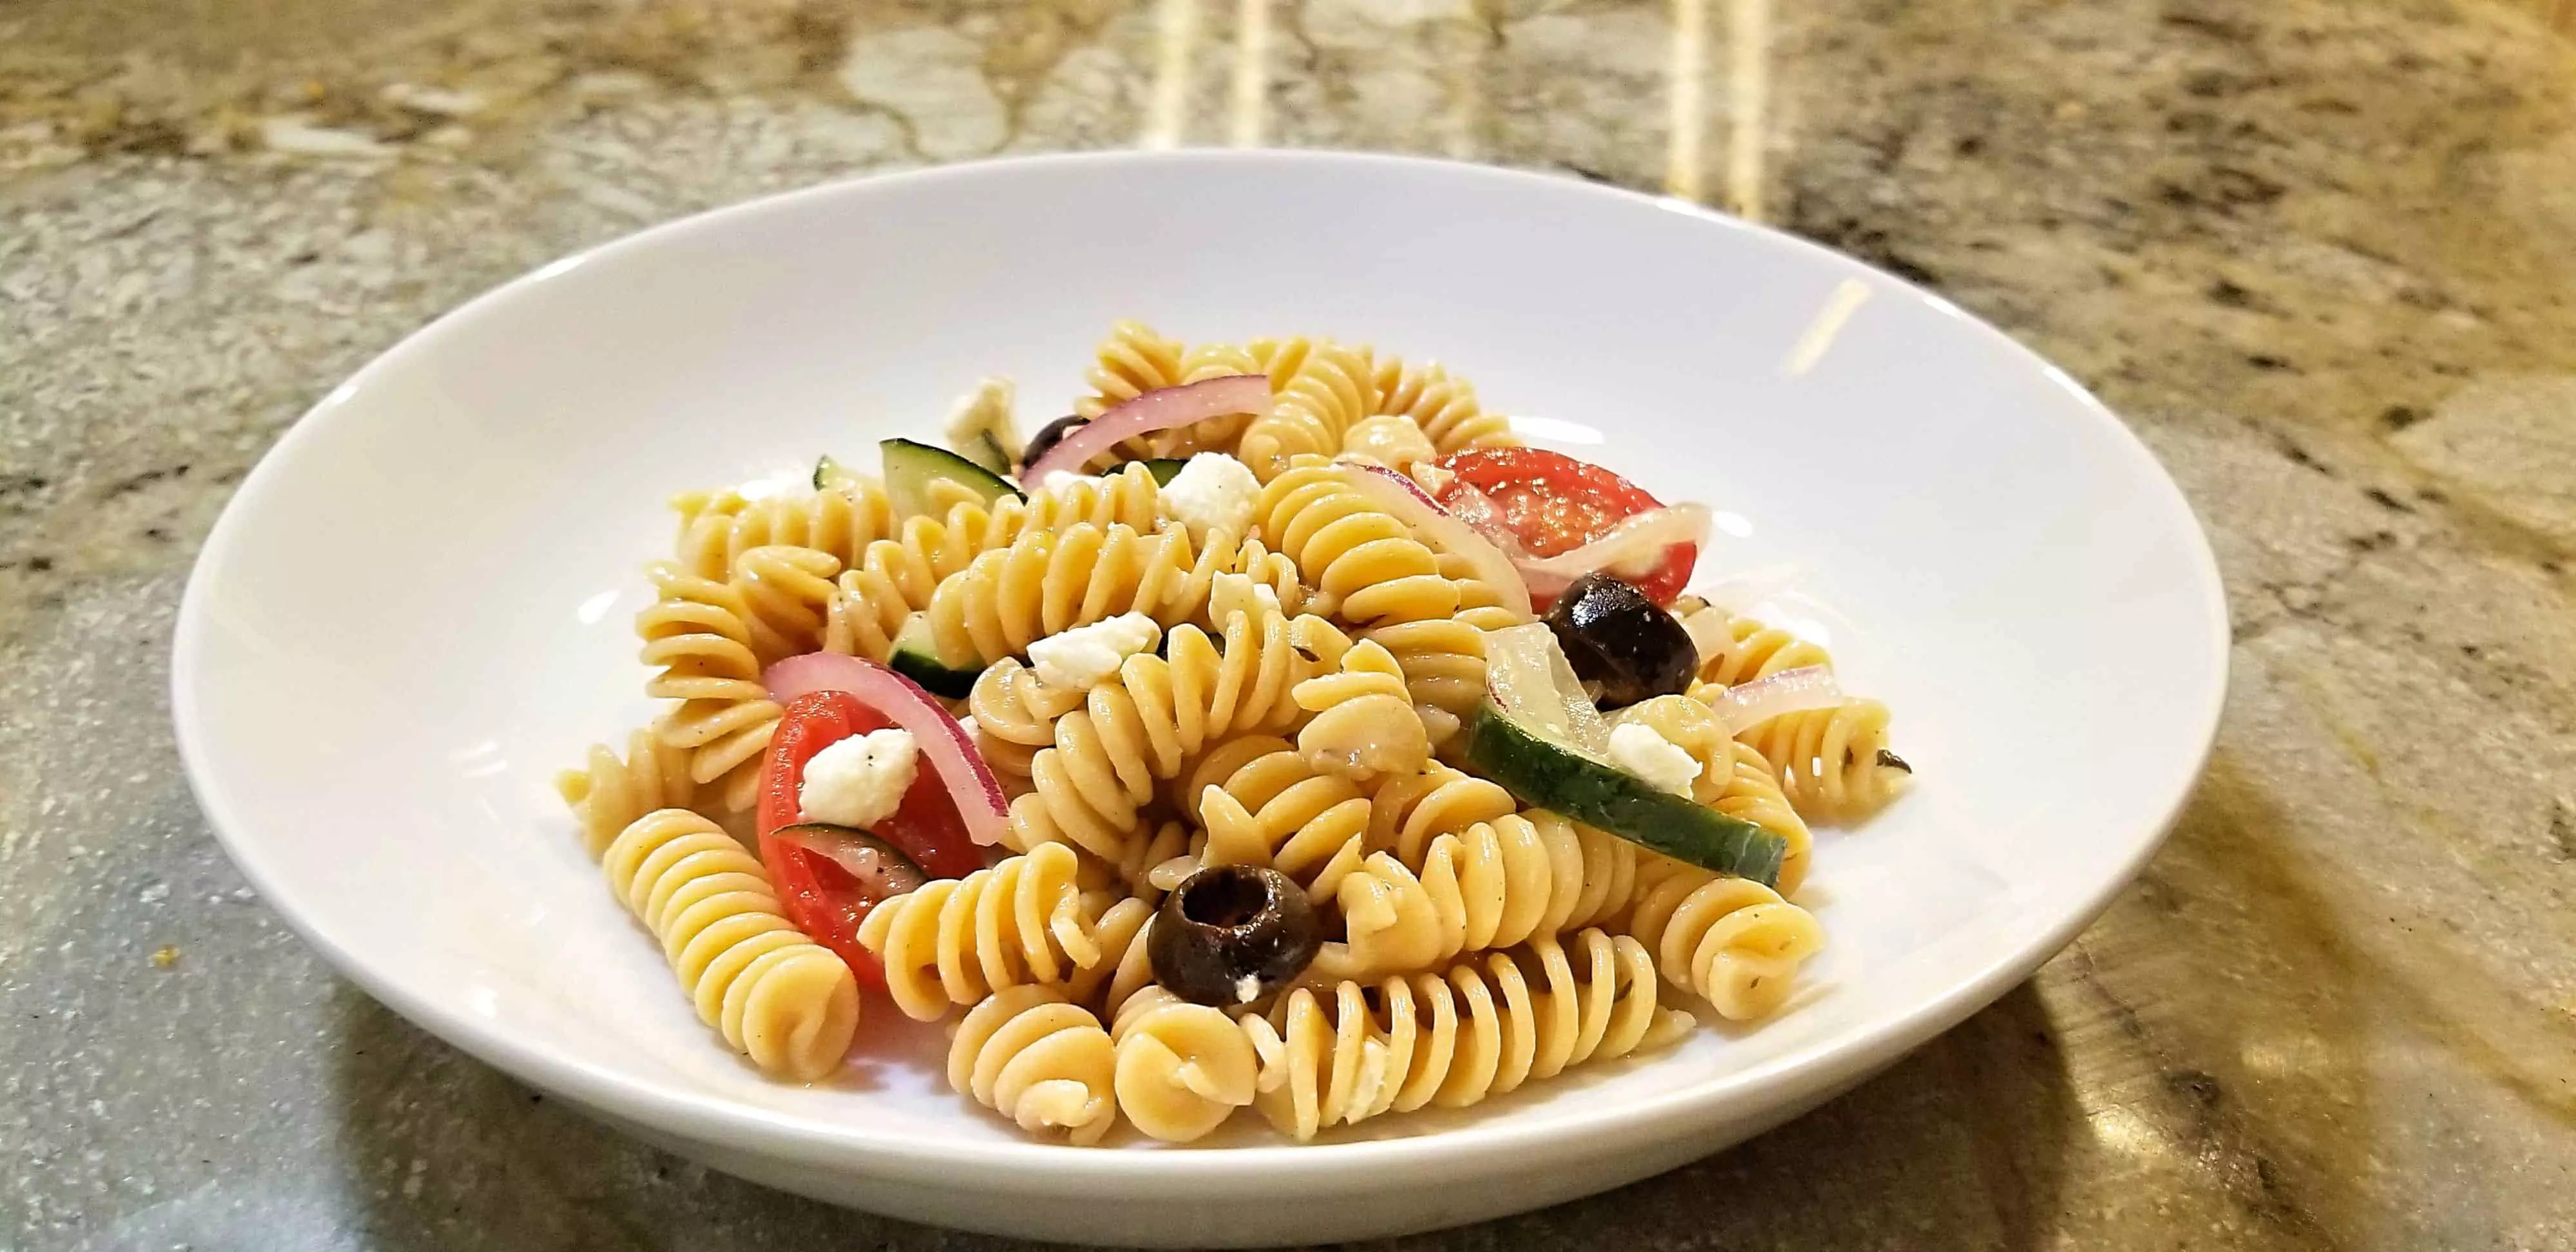 Find out about Barilla's chickpea pasta and grab our recipe for one of our favorite Greek side dishes on Made in a Pinch. Follow us on Pinterest for more healthy living tips and easy recipes!